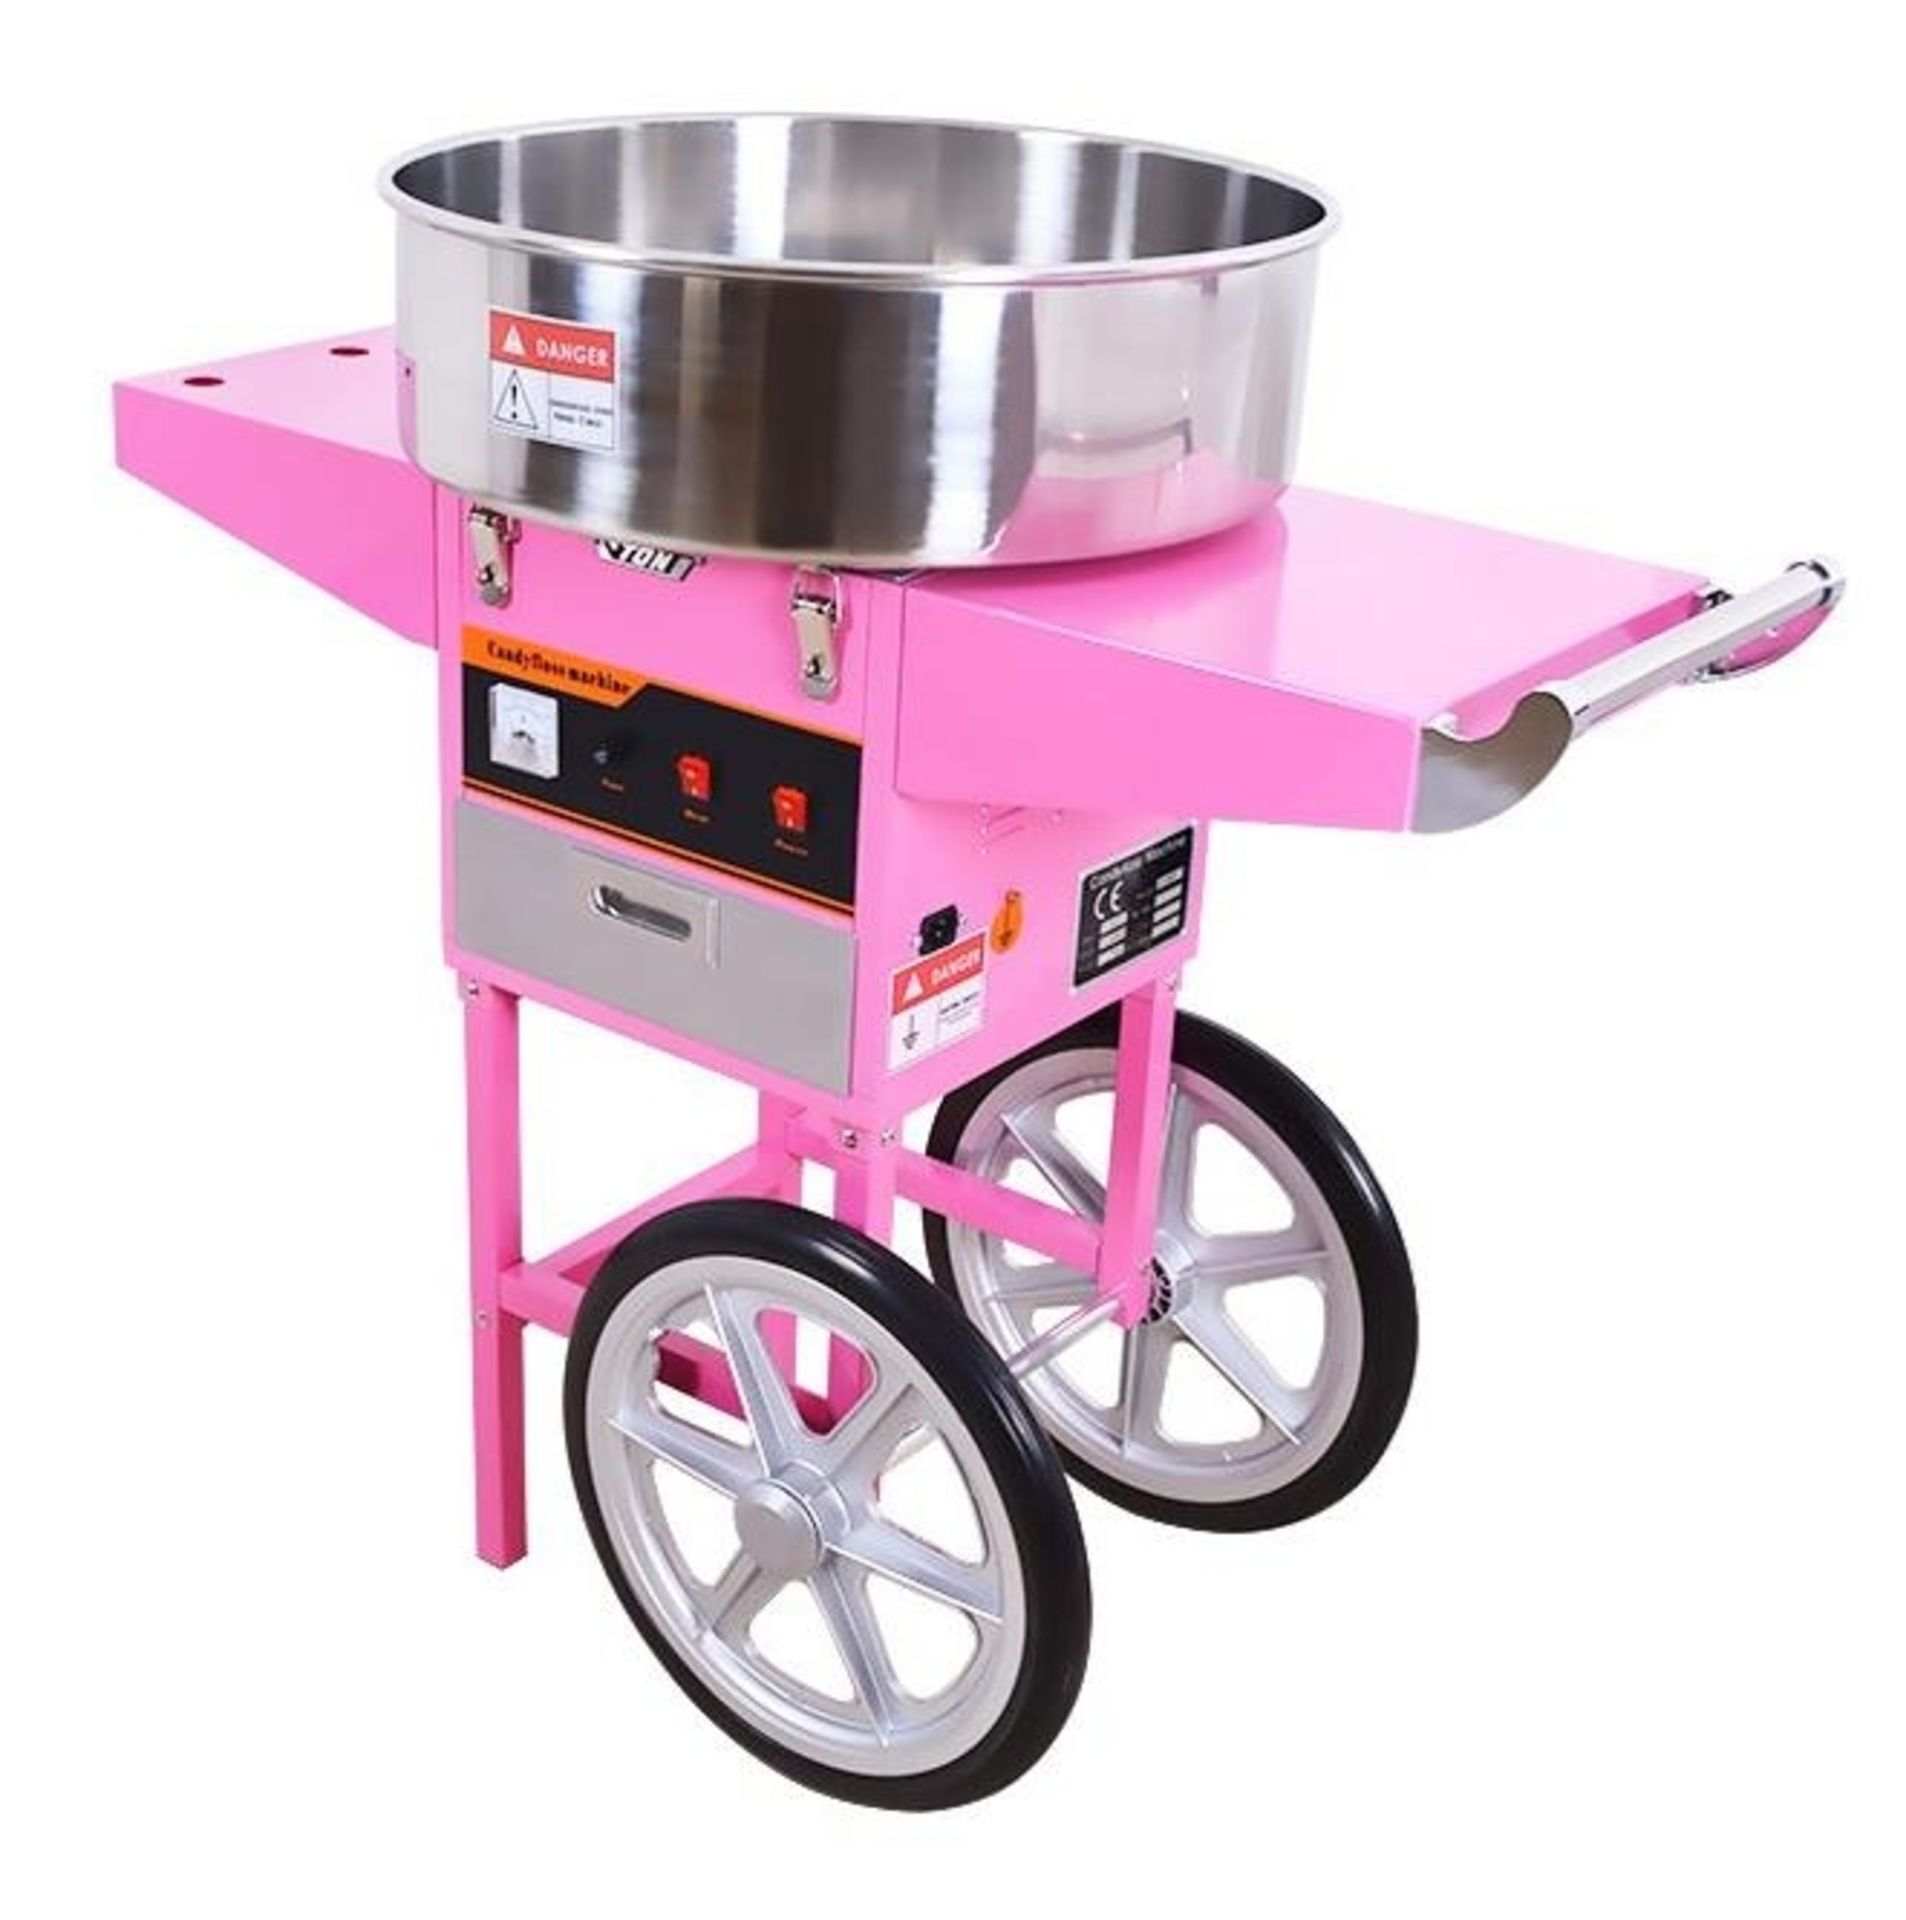 Vevor candy floss machine model no. ET-MF05 brand new in box (stock photo shown on listing). - Image 4 of 4